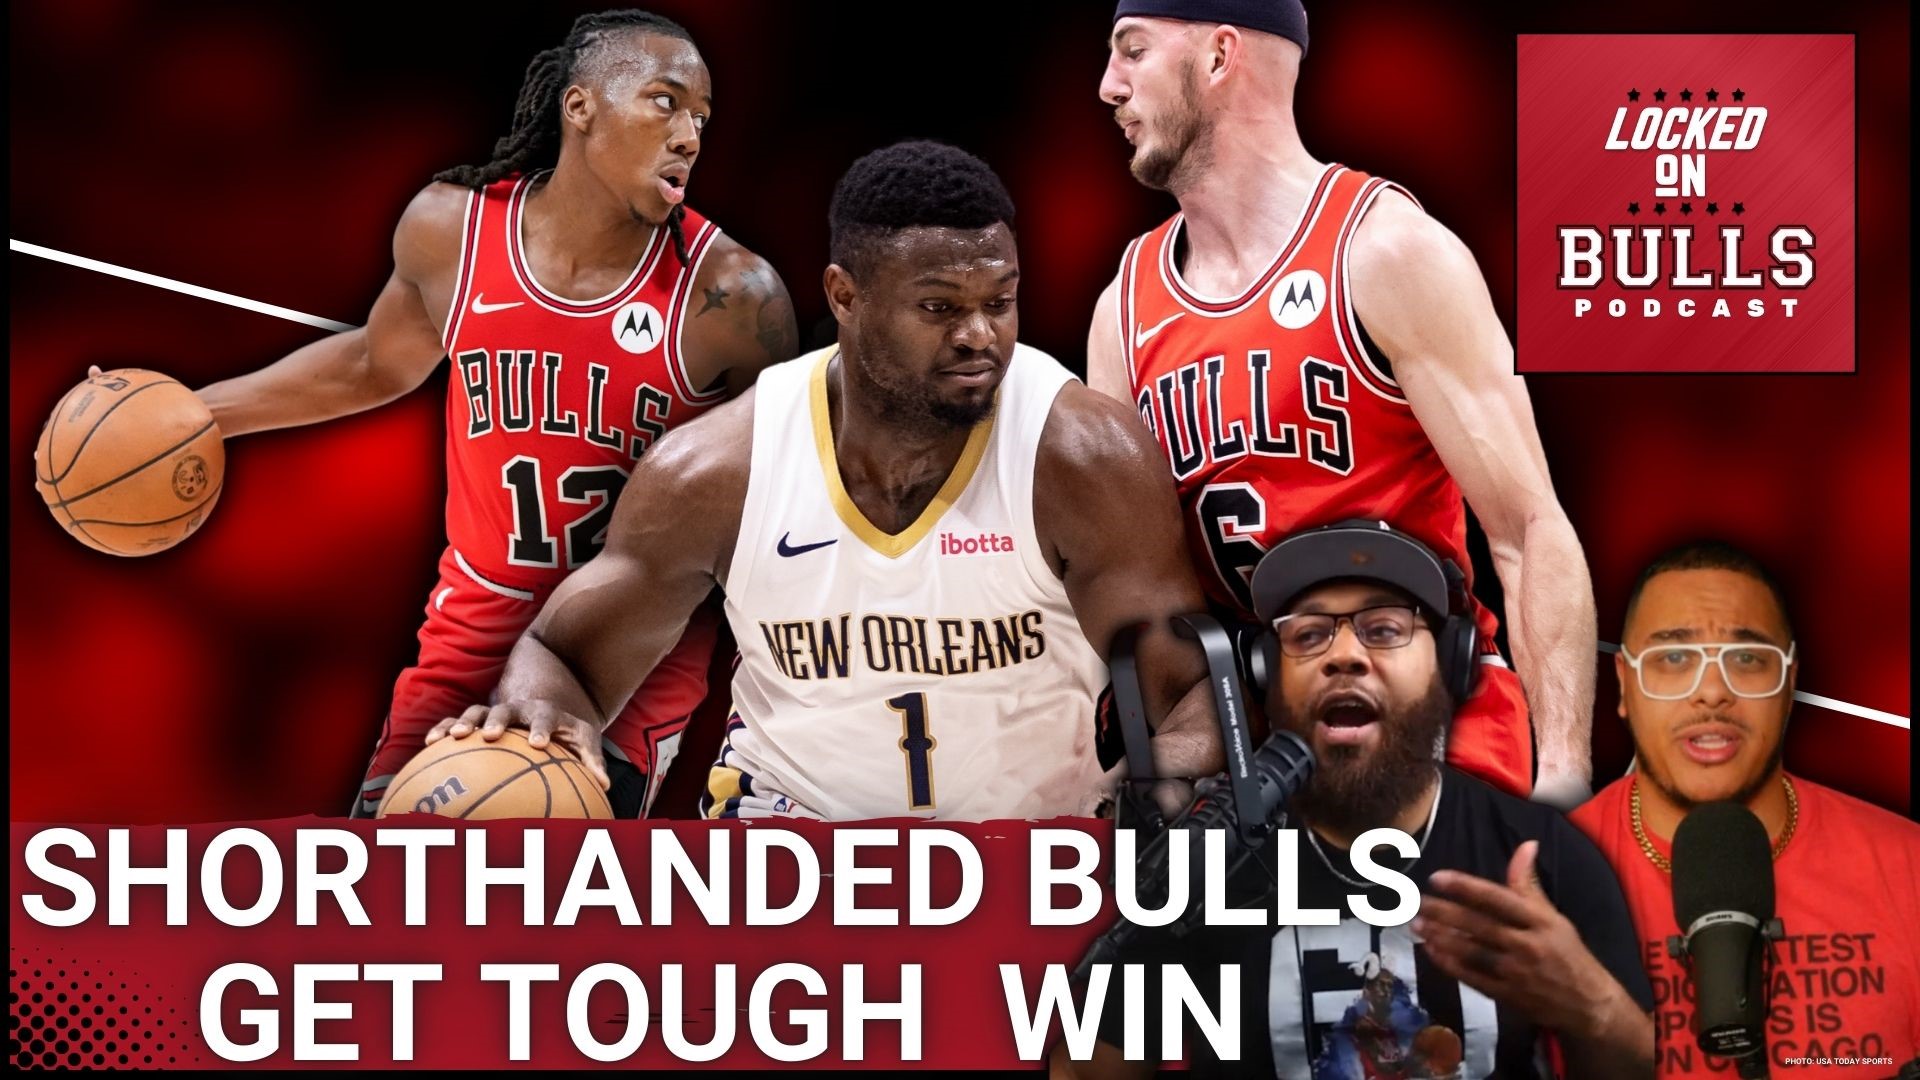 Haize & Pat The Dsigner breakdown the Bulls' win over the Pelicans. The guys also talk about Ayo Dosunmu's recent play and how they now view his ceiling.